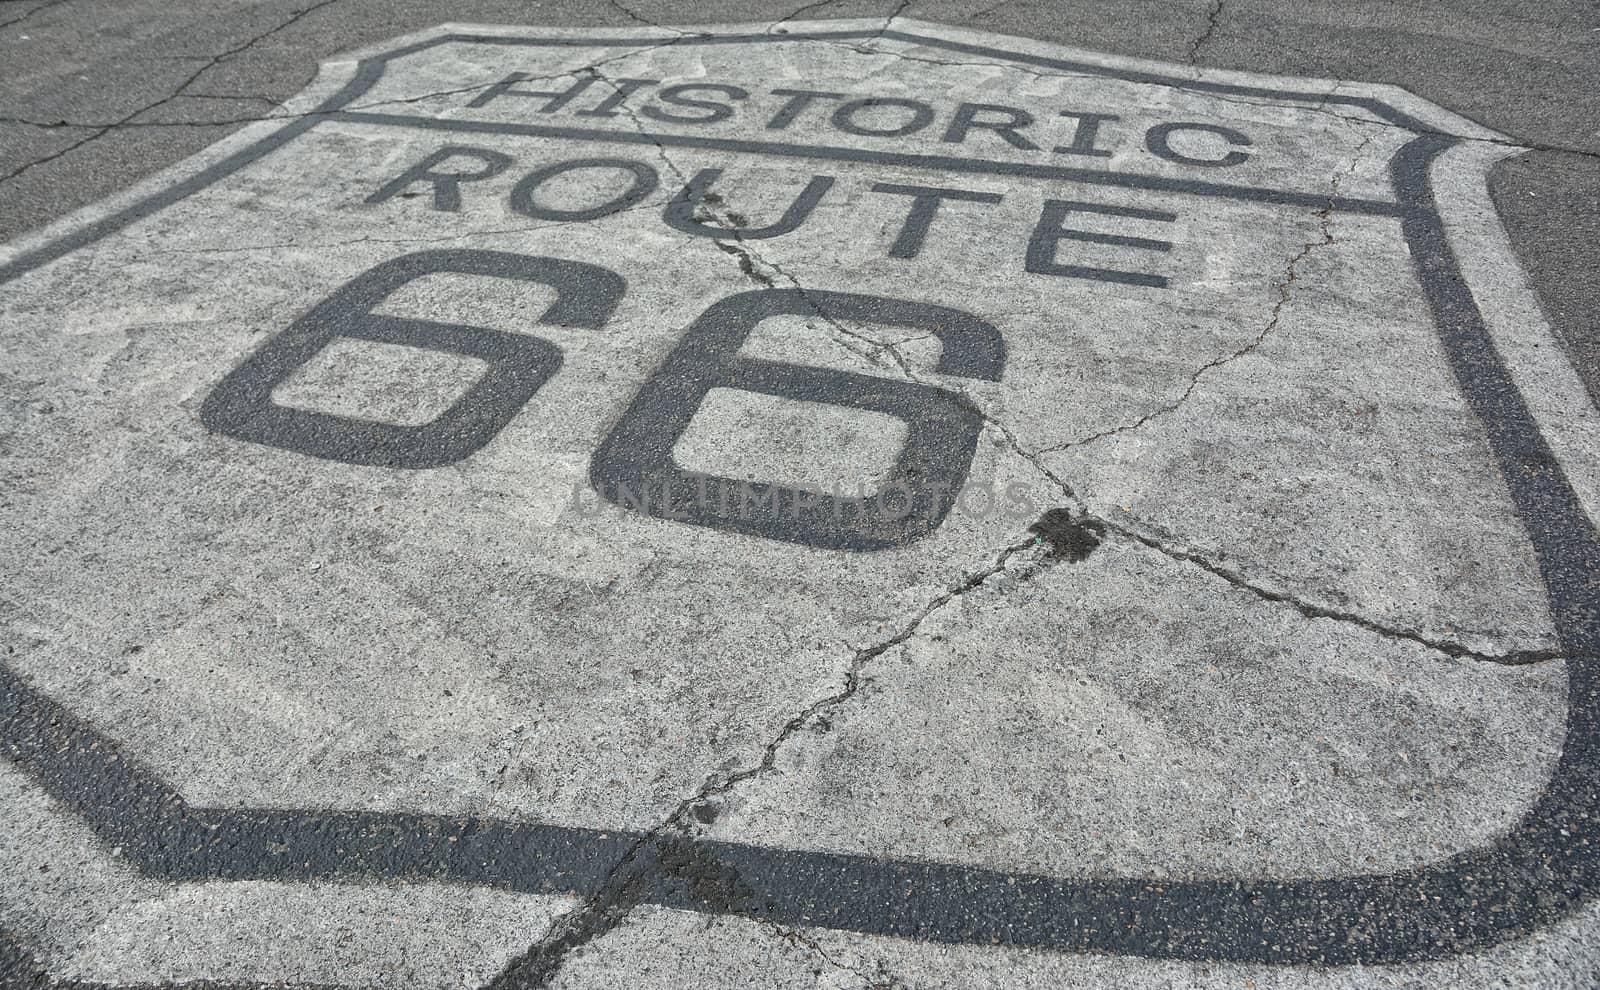 Sign of historic route 66 on the asphalt.